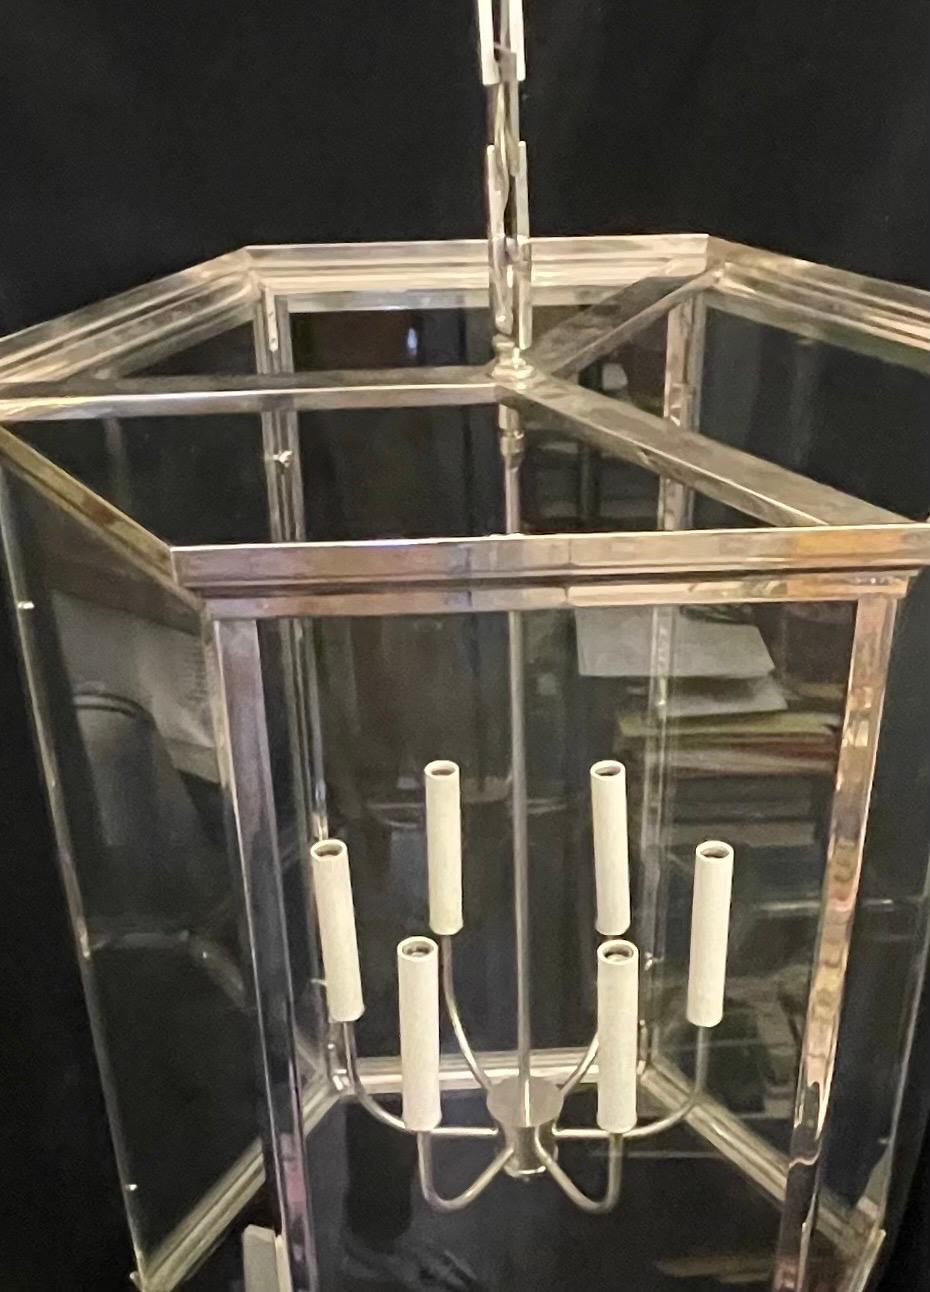 Sleek Modern Art Deco Large Polished Nickel Octagonal Glass Lantern Fixture In Good Condition For Sale In Roslyn, NY